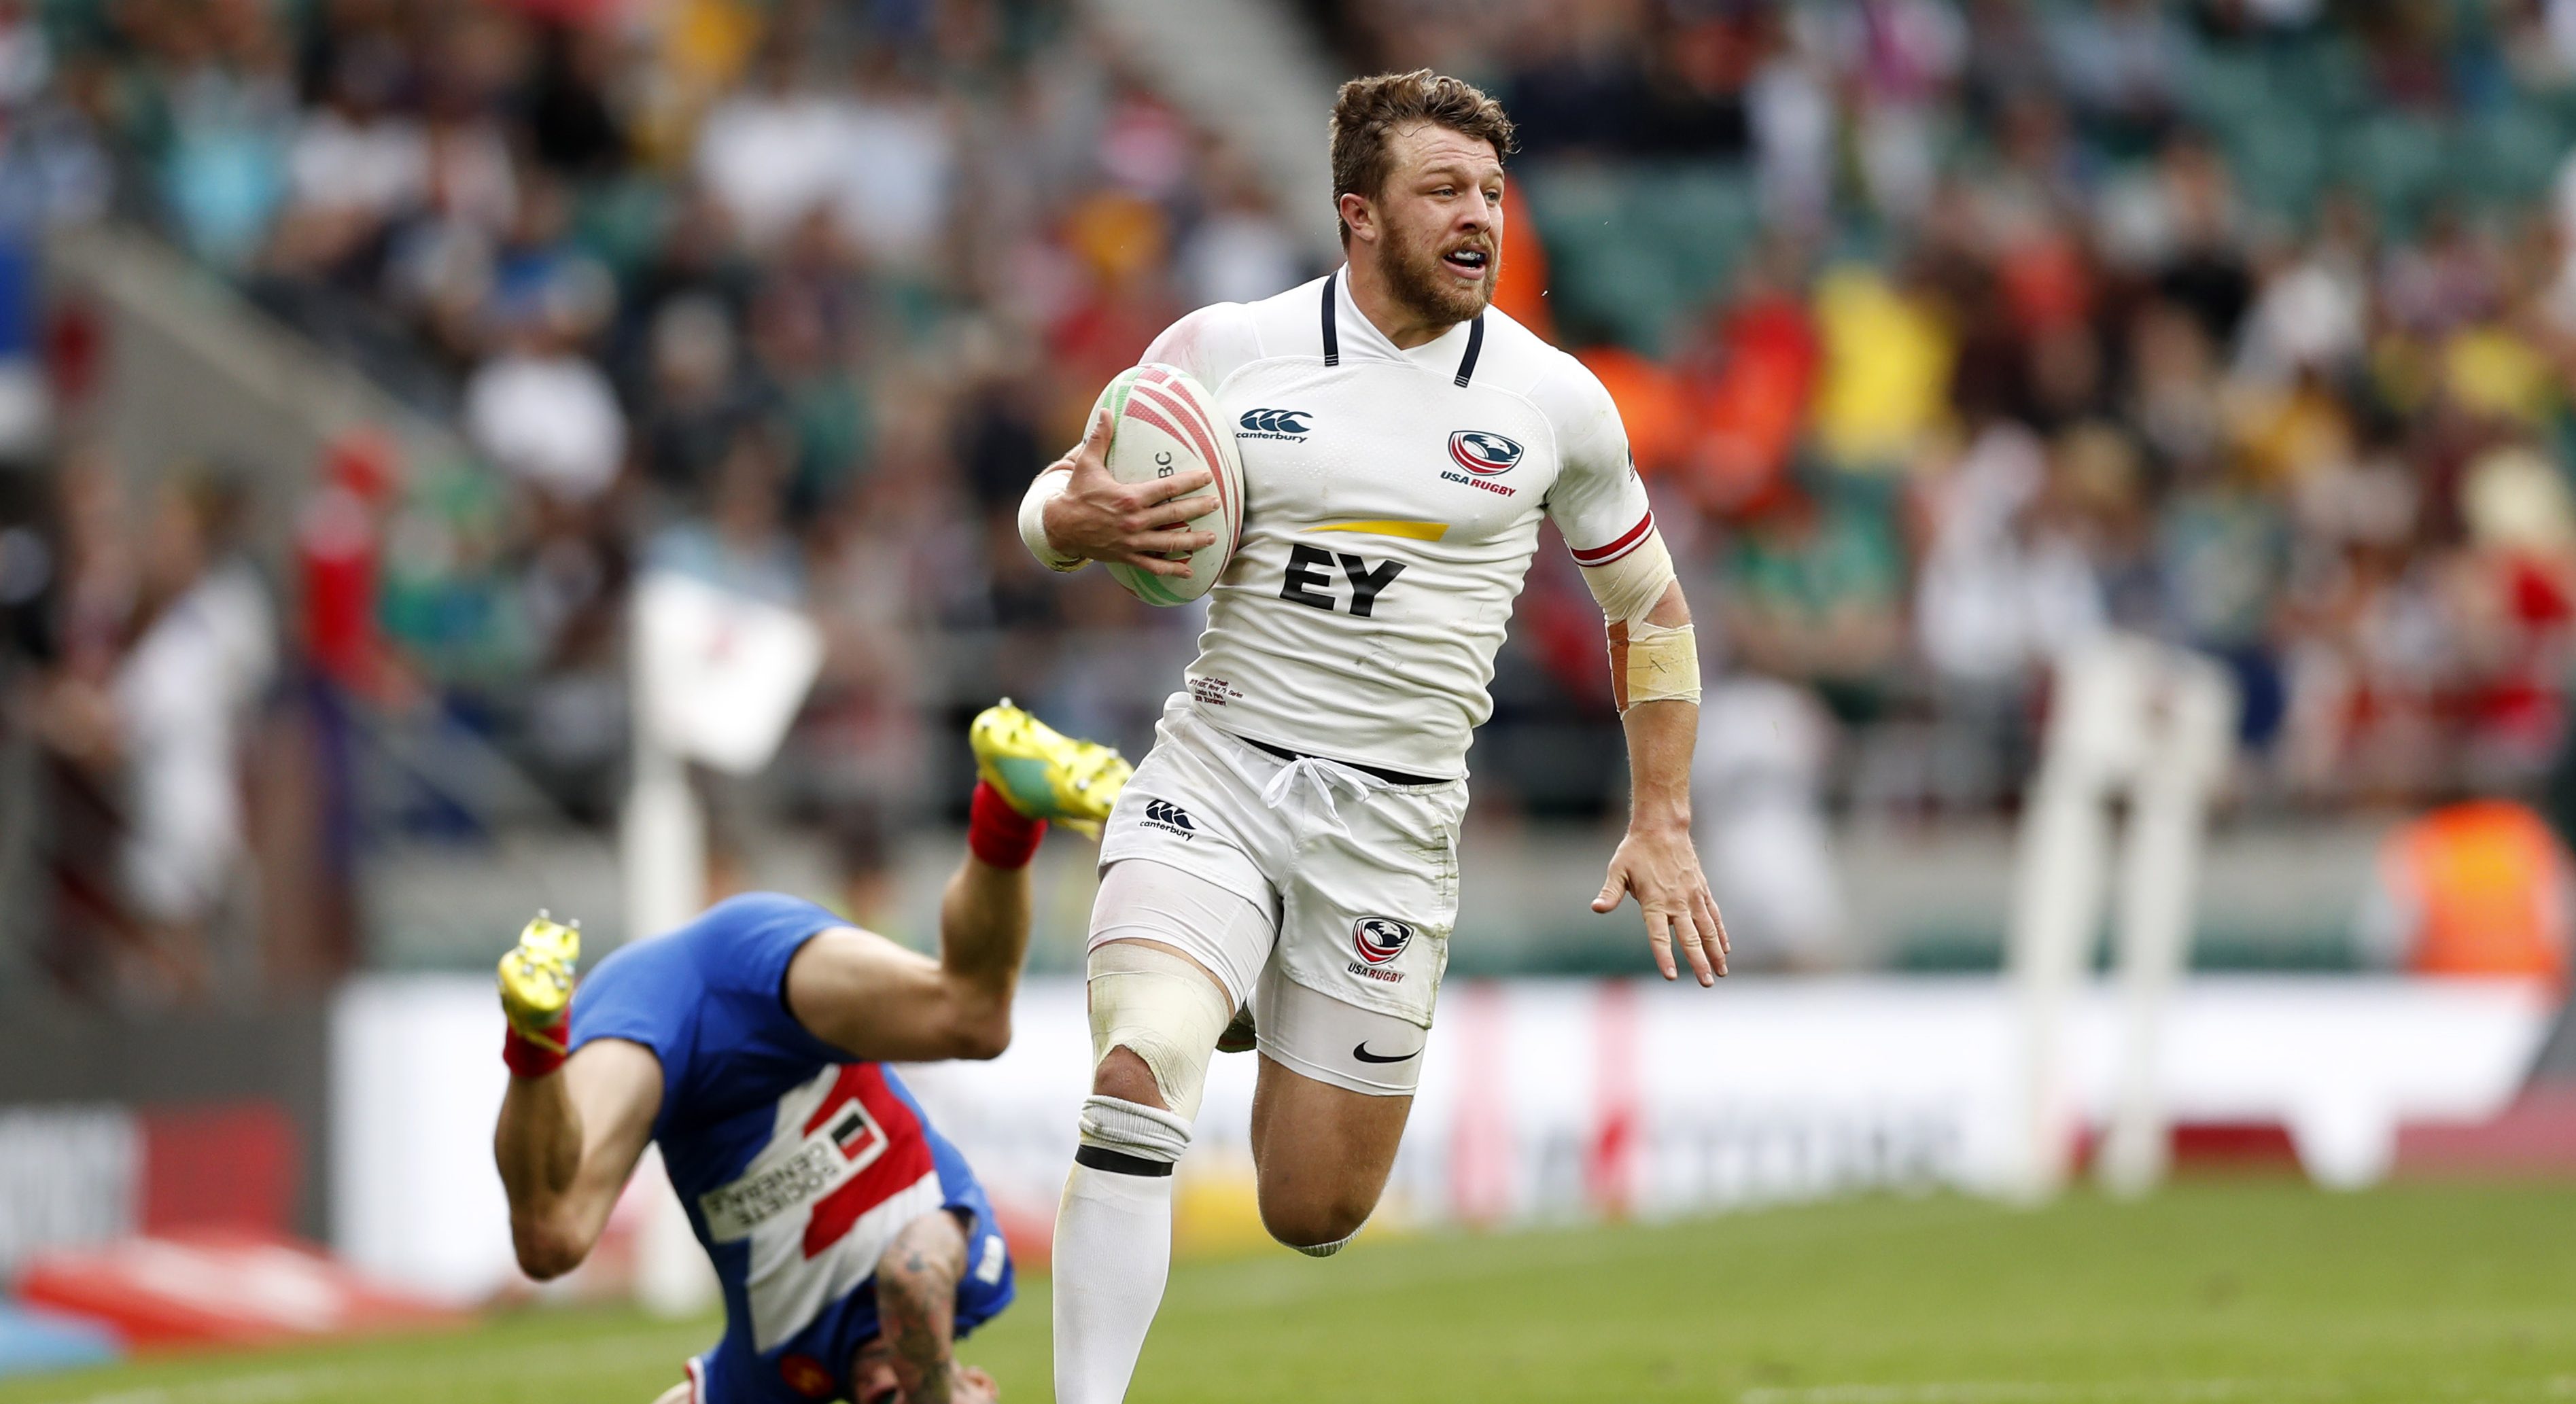 5 Facts About USA Rugby Star Steve Tomasin